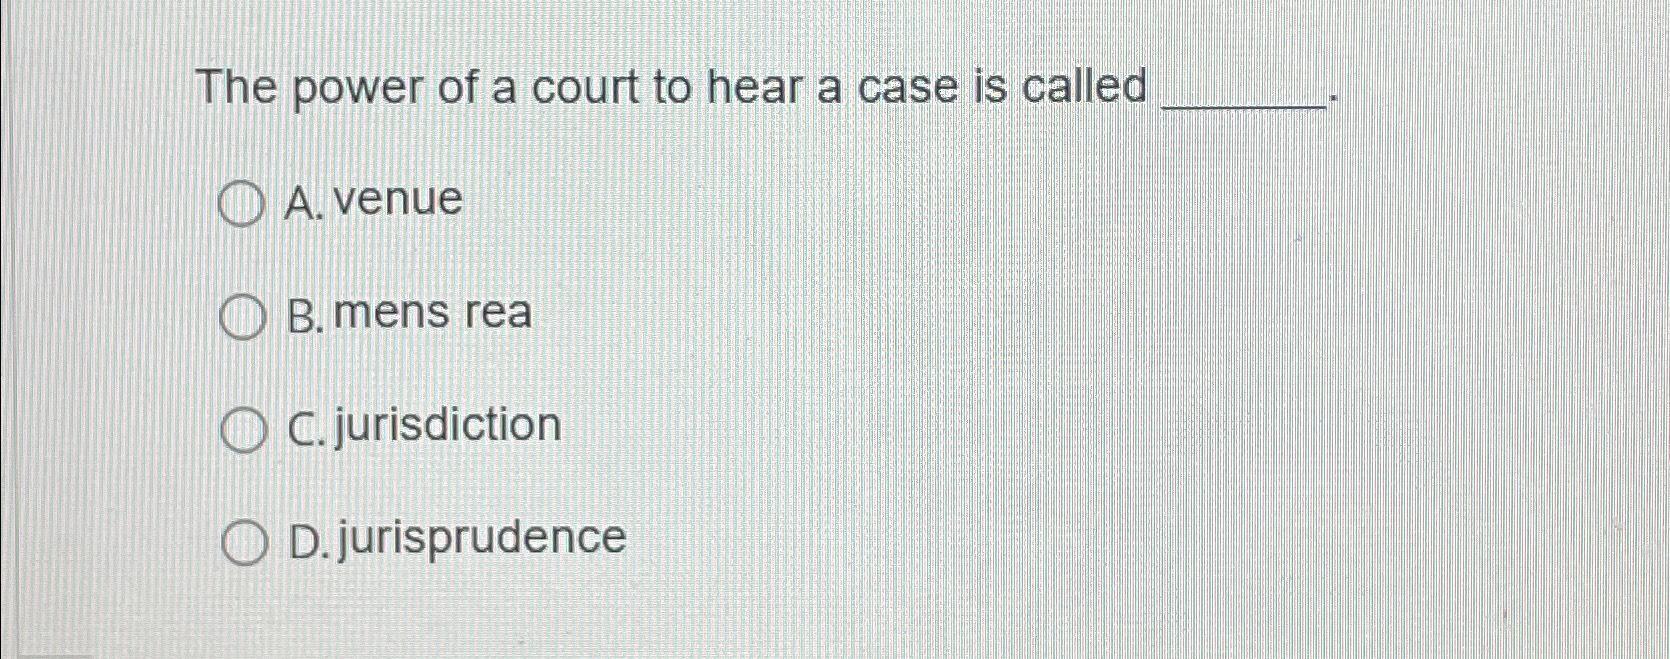 The power of a court to hear a case is called A. venue B. mens rea OC.jurisdiction D.jurisprudence